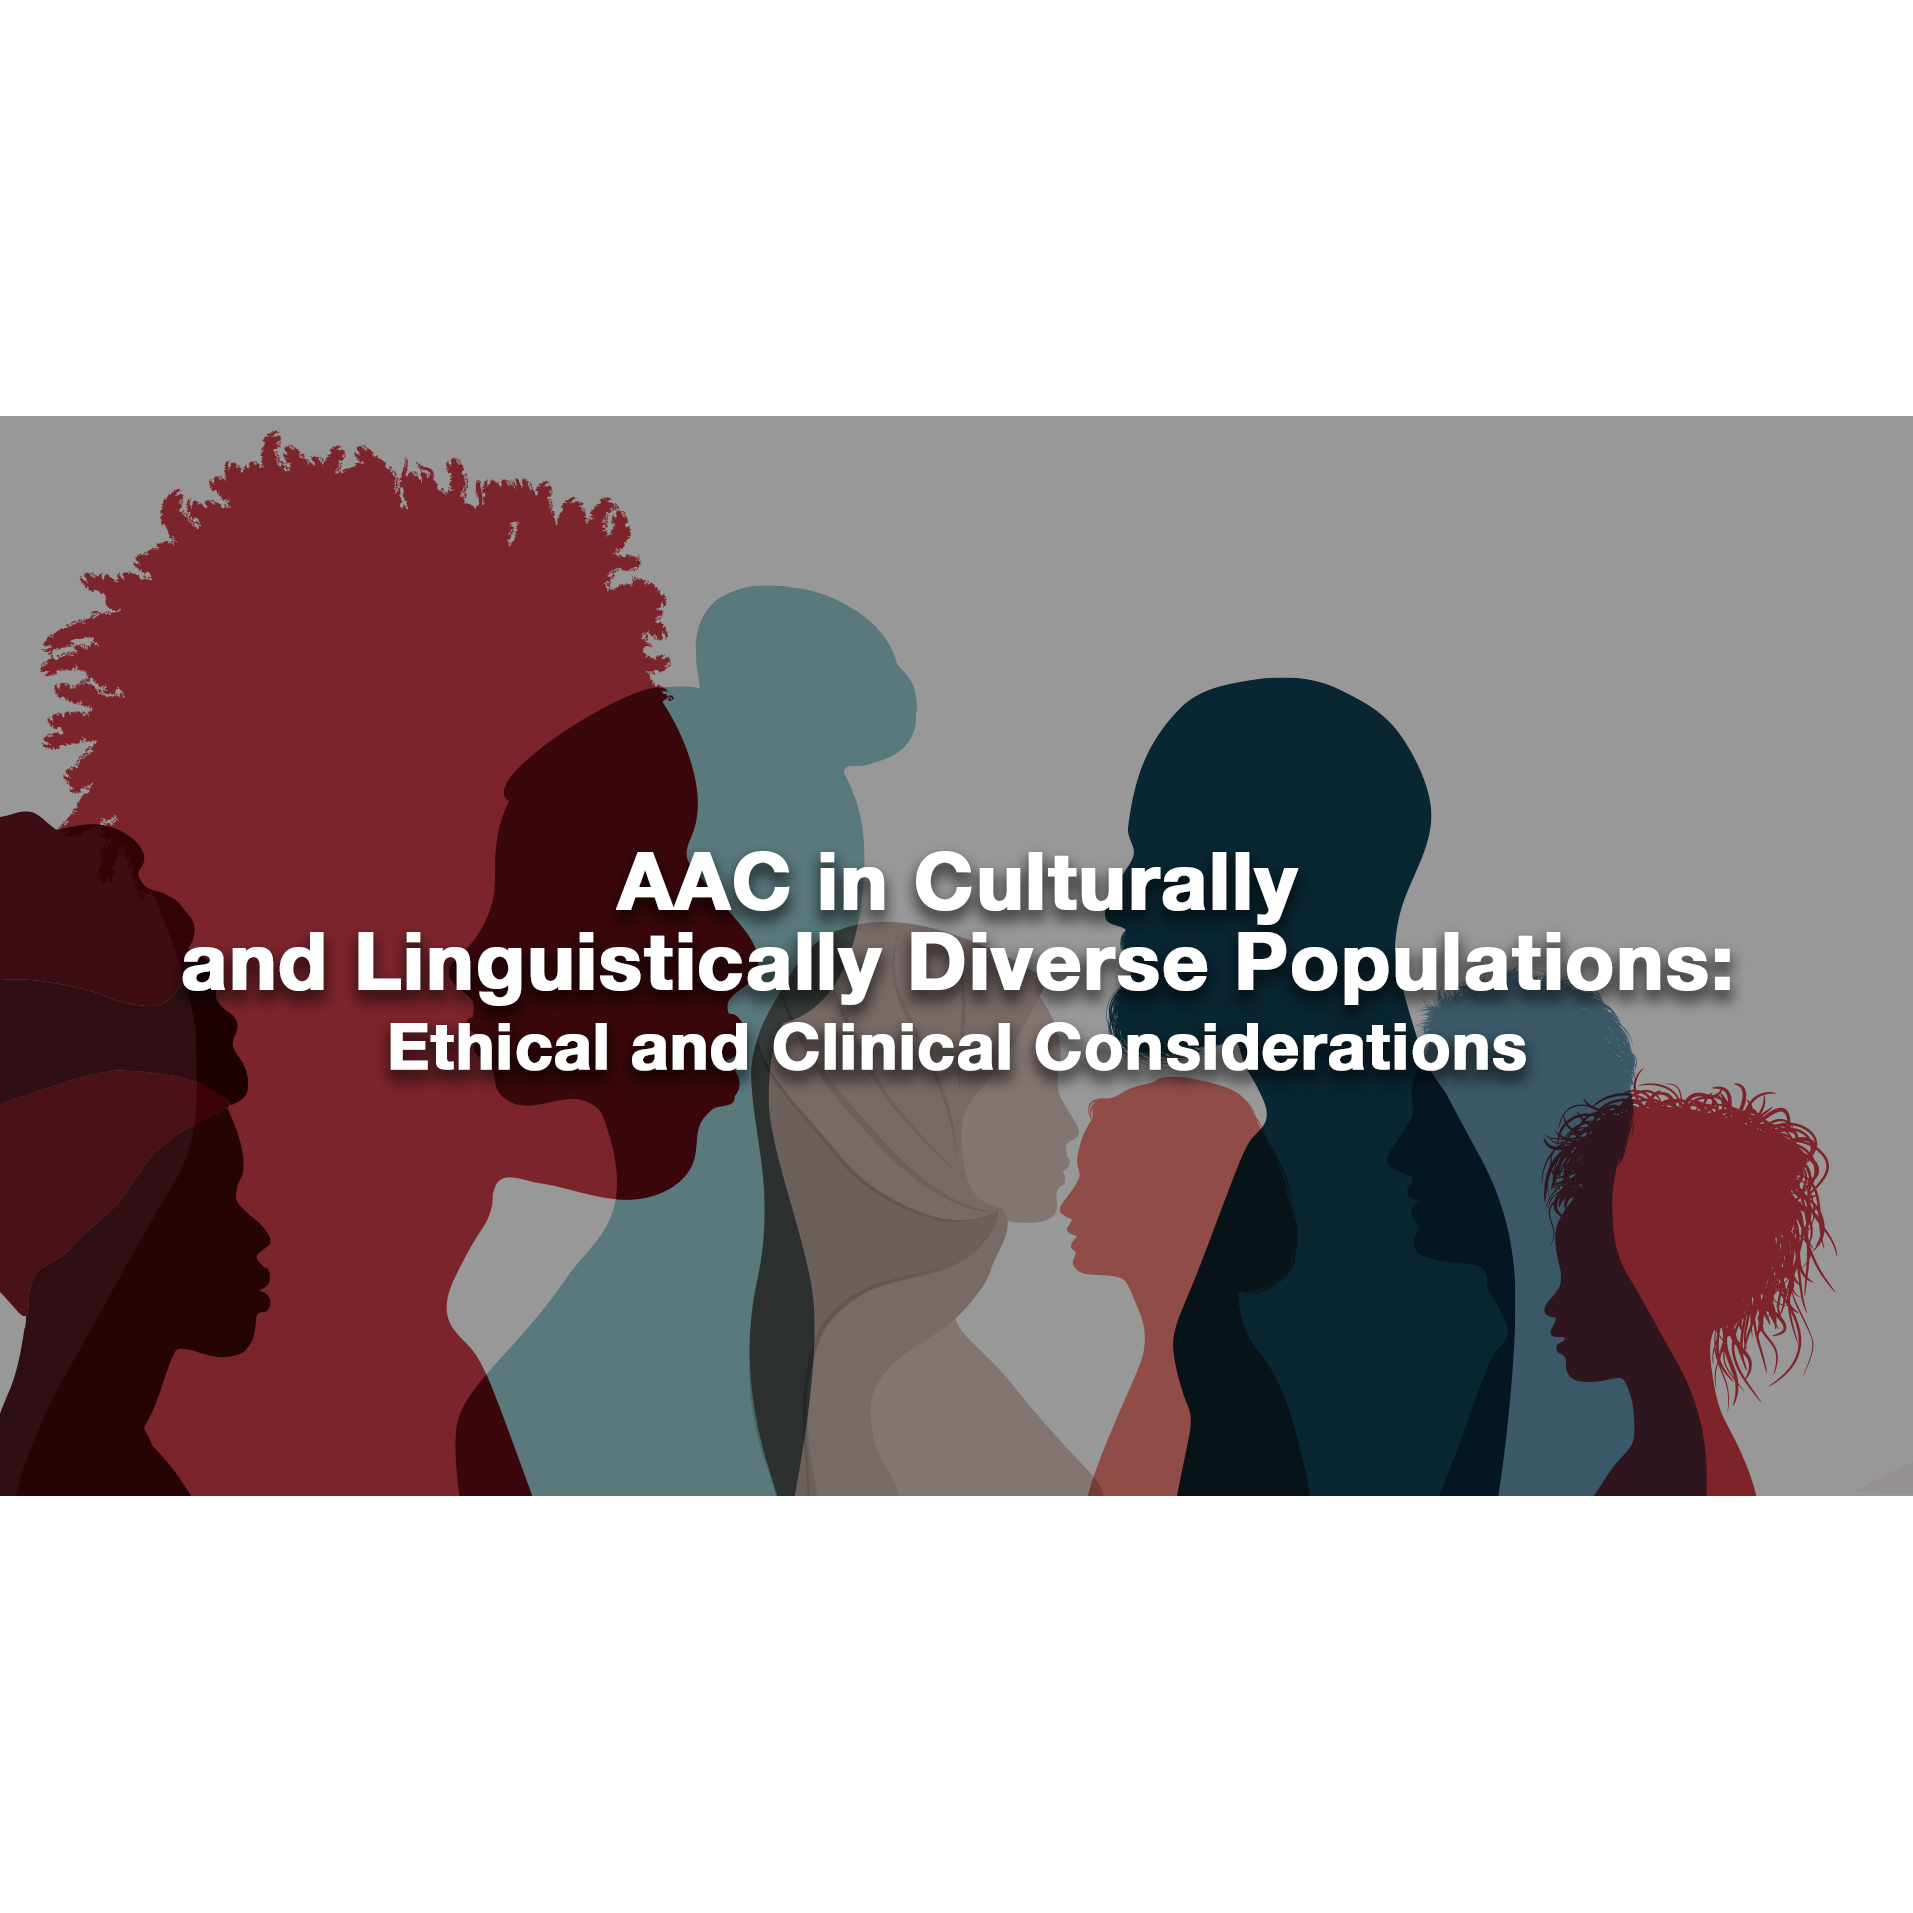 AAC in Culturally and Linguistically Diverse Populations: Ethical and Clinical Considerations